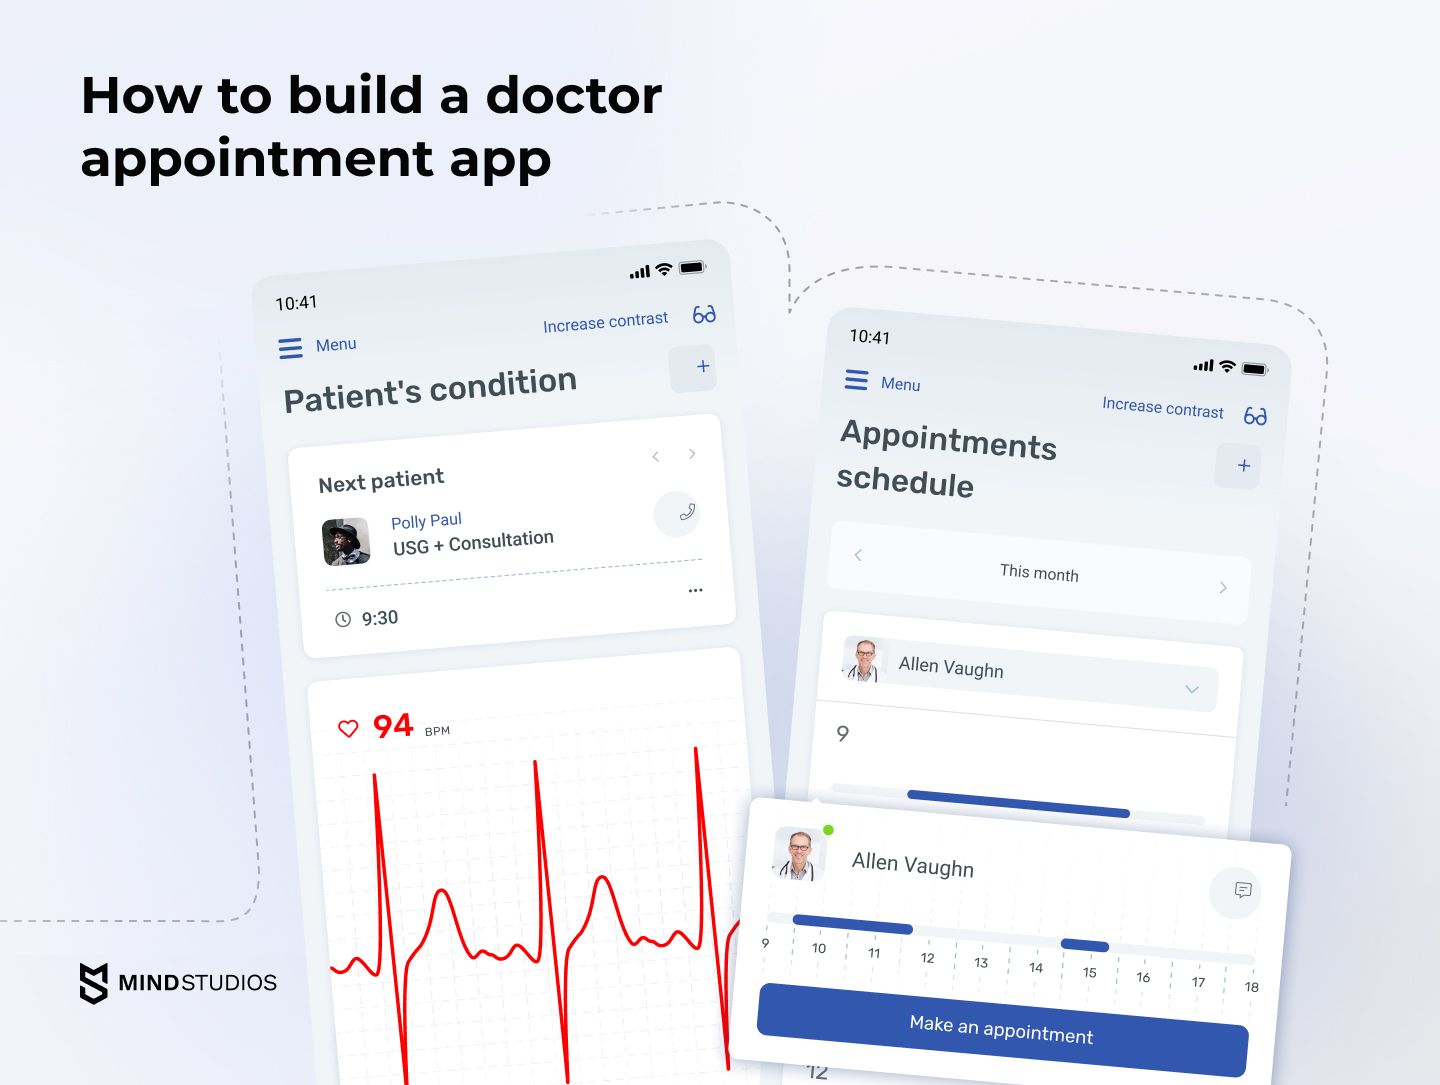 Doctor-on-Demand: A Practical Guide to Creating a Telemedicine App